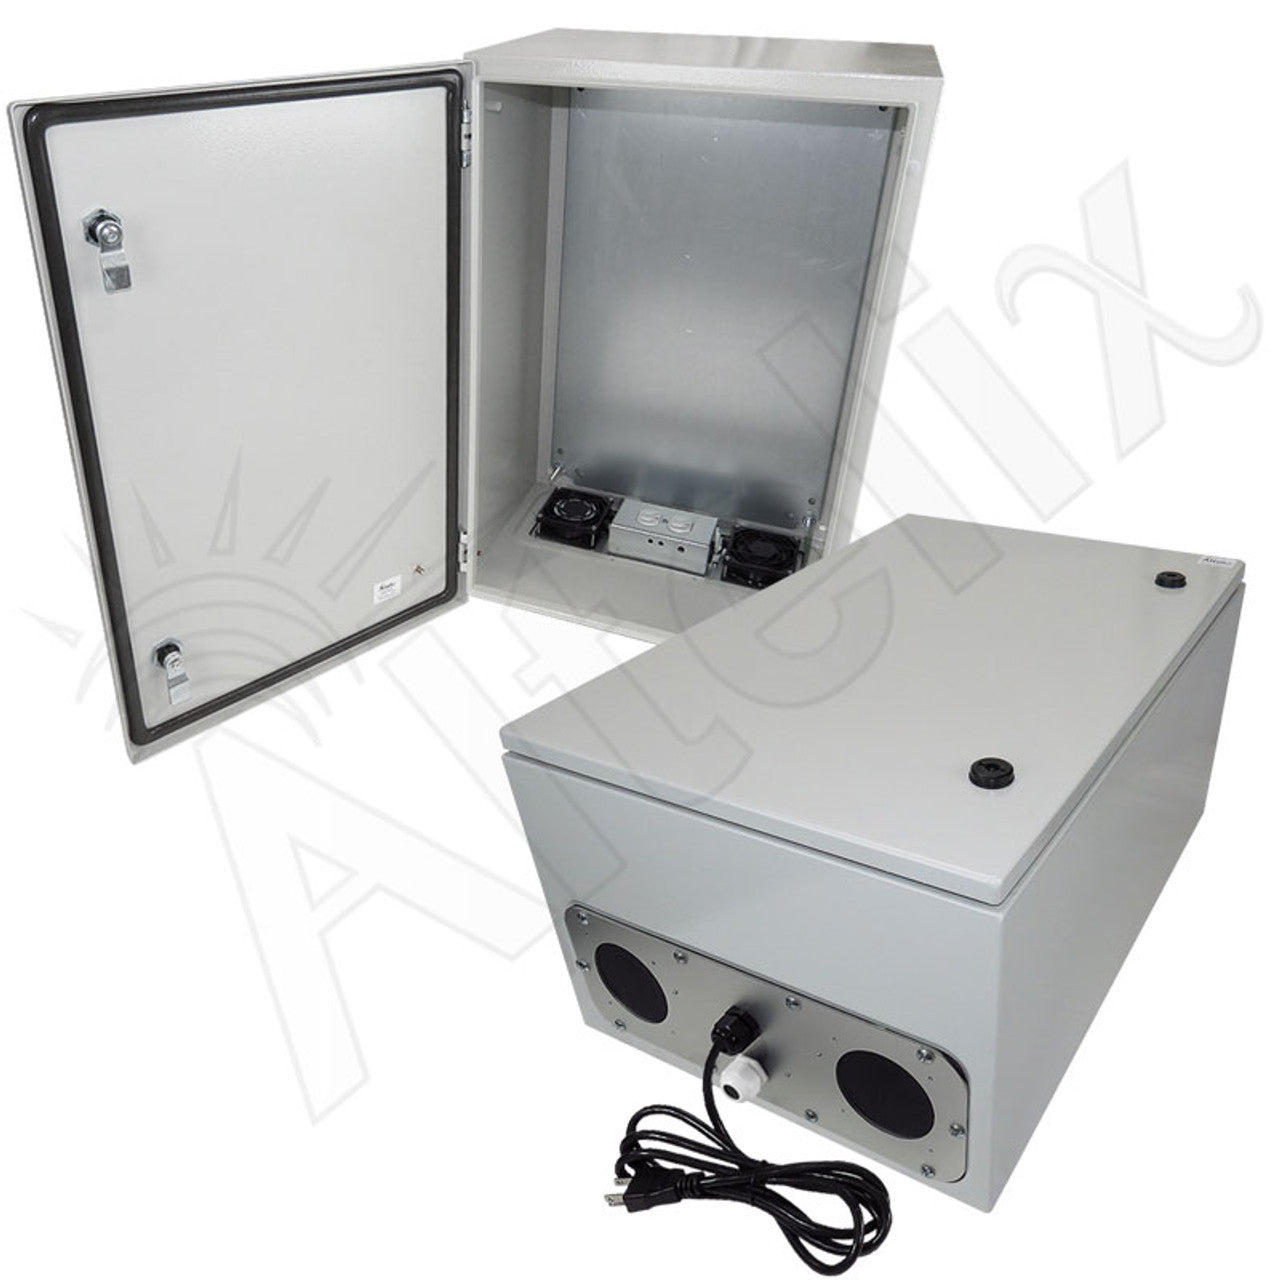 Altelix Steel Weatherproof NEMA Enclosure with 120 VAC Outlets, Power Cord & 85°F Turn-On Cooling Fan